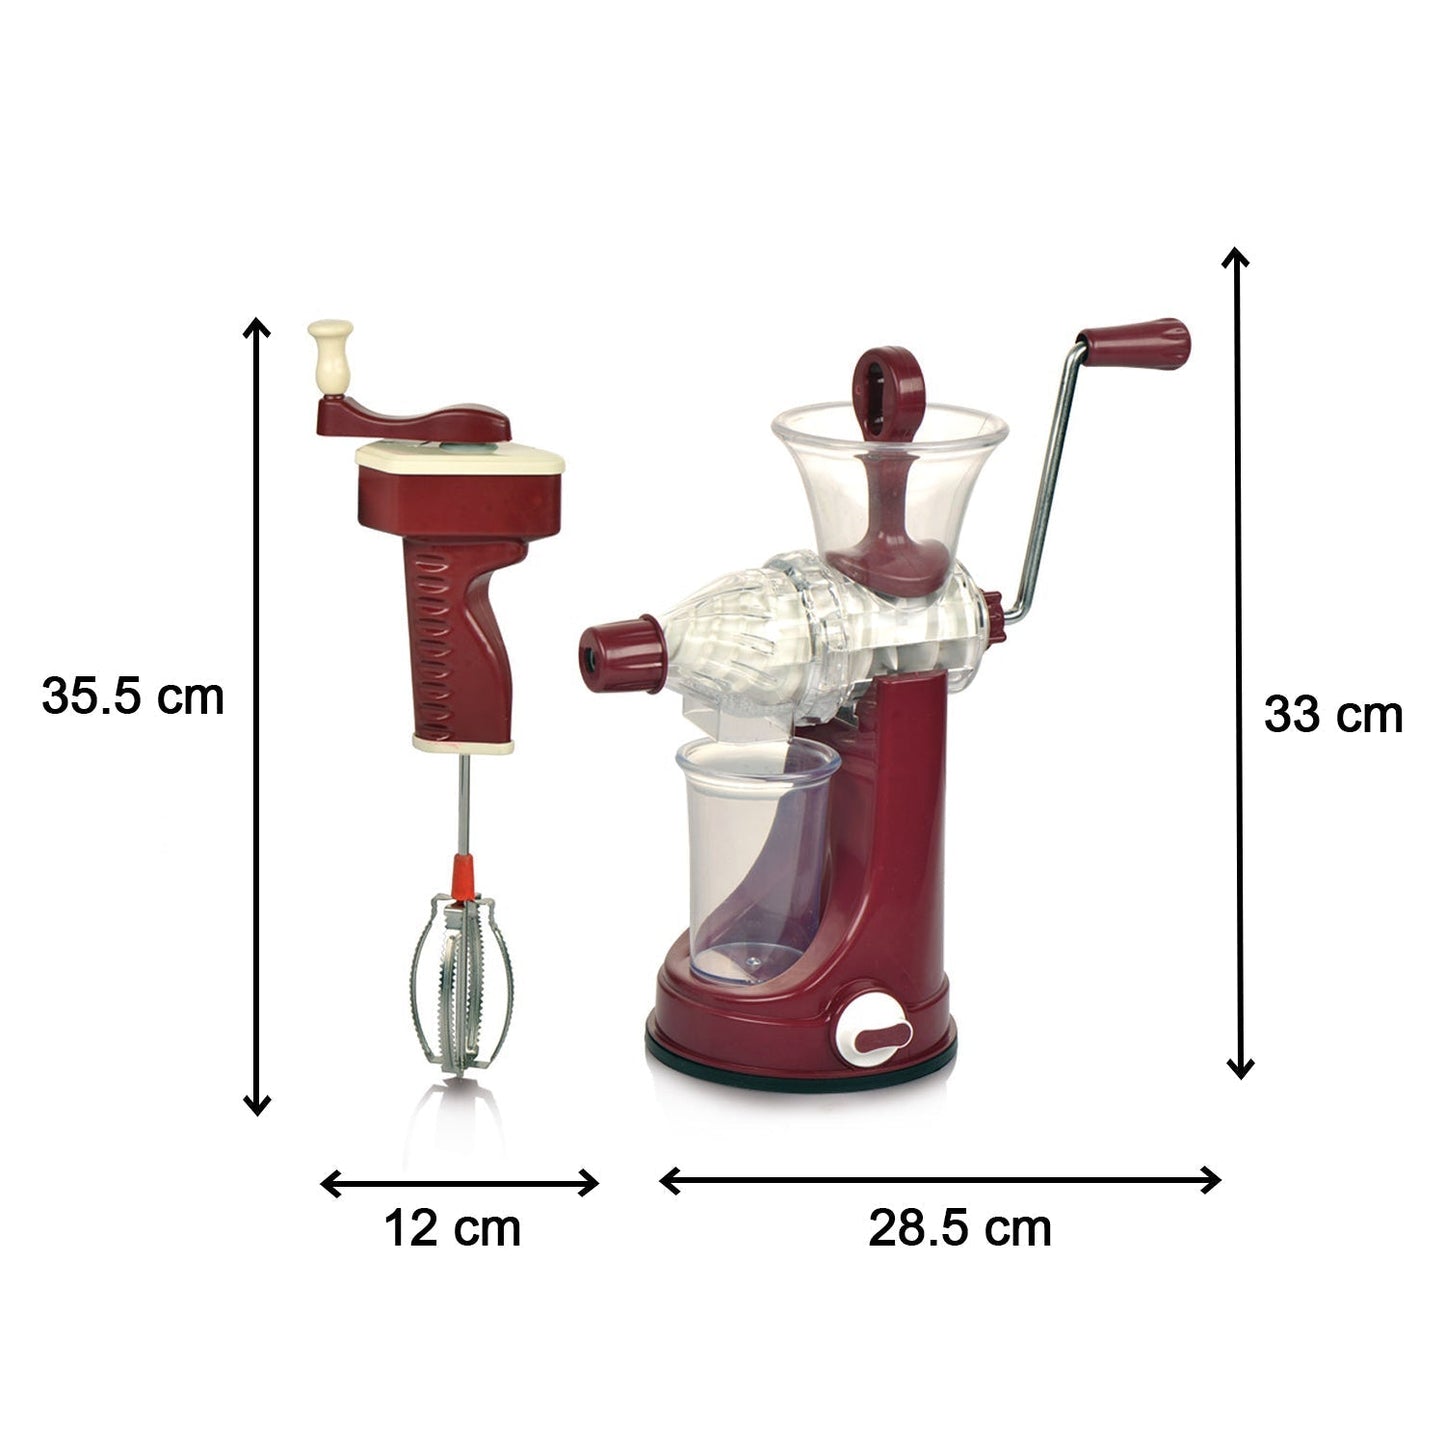 7017B ABS Juicer N Blender used widely in all kinds of household kitchen purposes for making and blending fruit juices and beverages. DeoDap